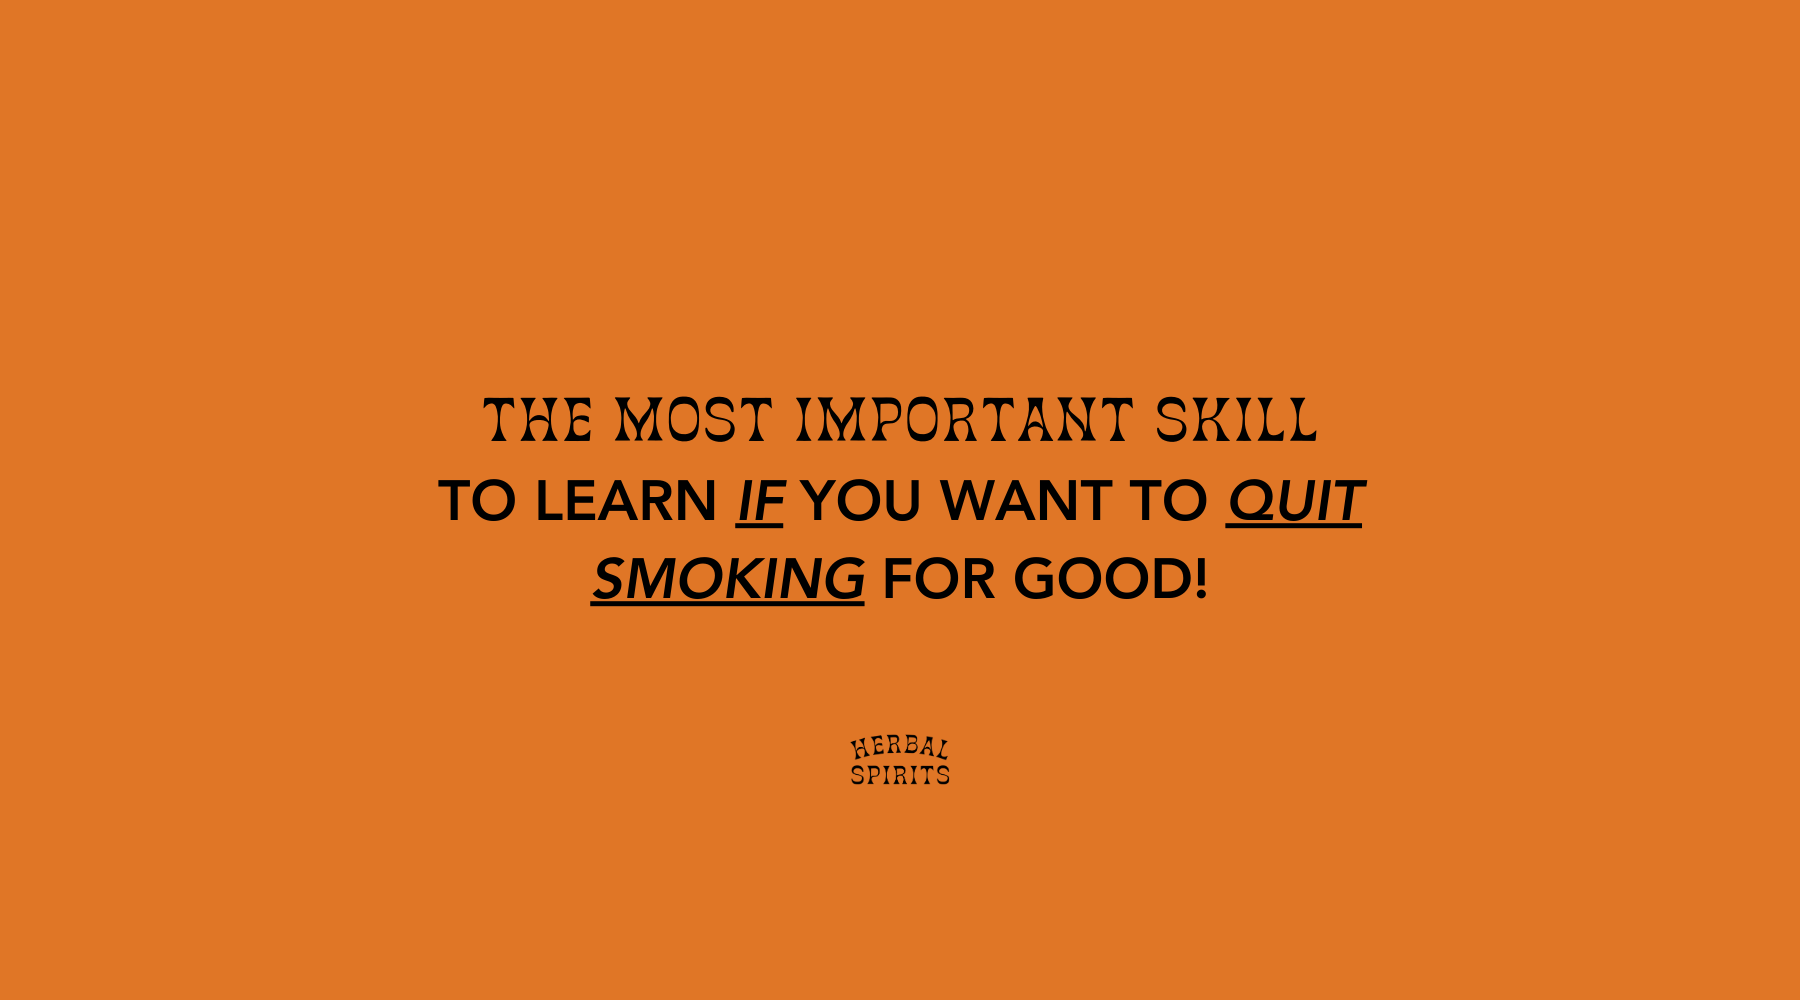 The most IMPORTANT skill to learn IF you want to QUIT your addiction to smoking FOR GOOD!